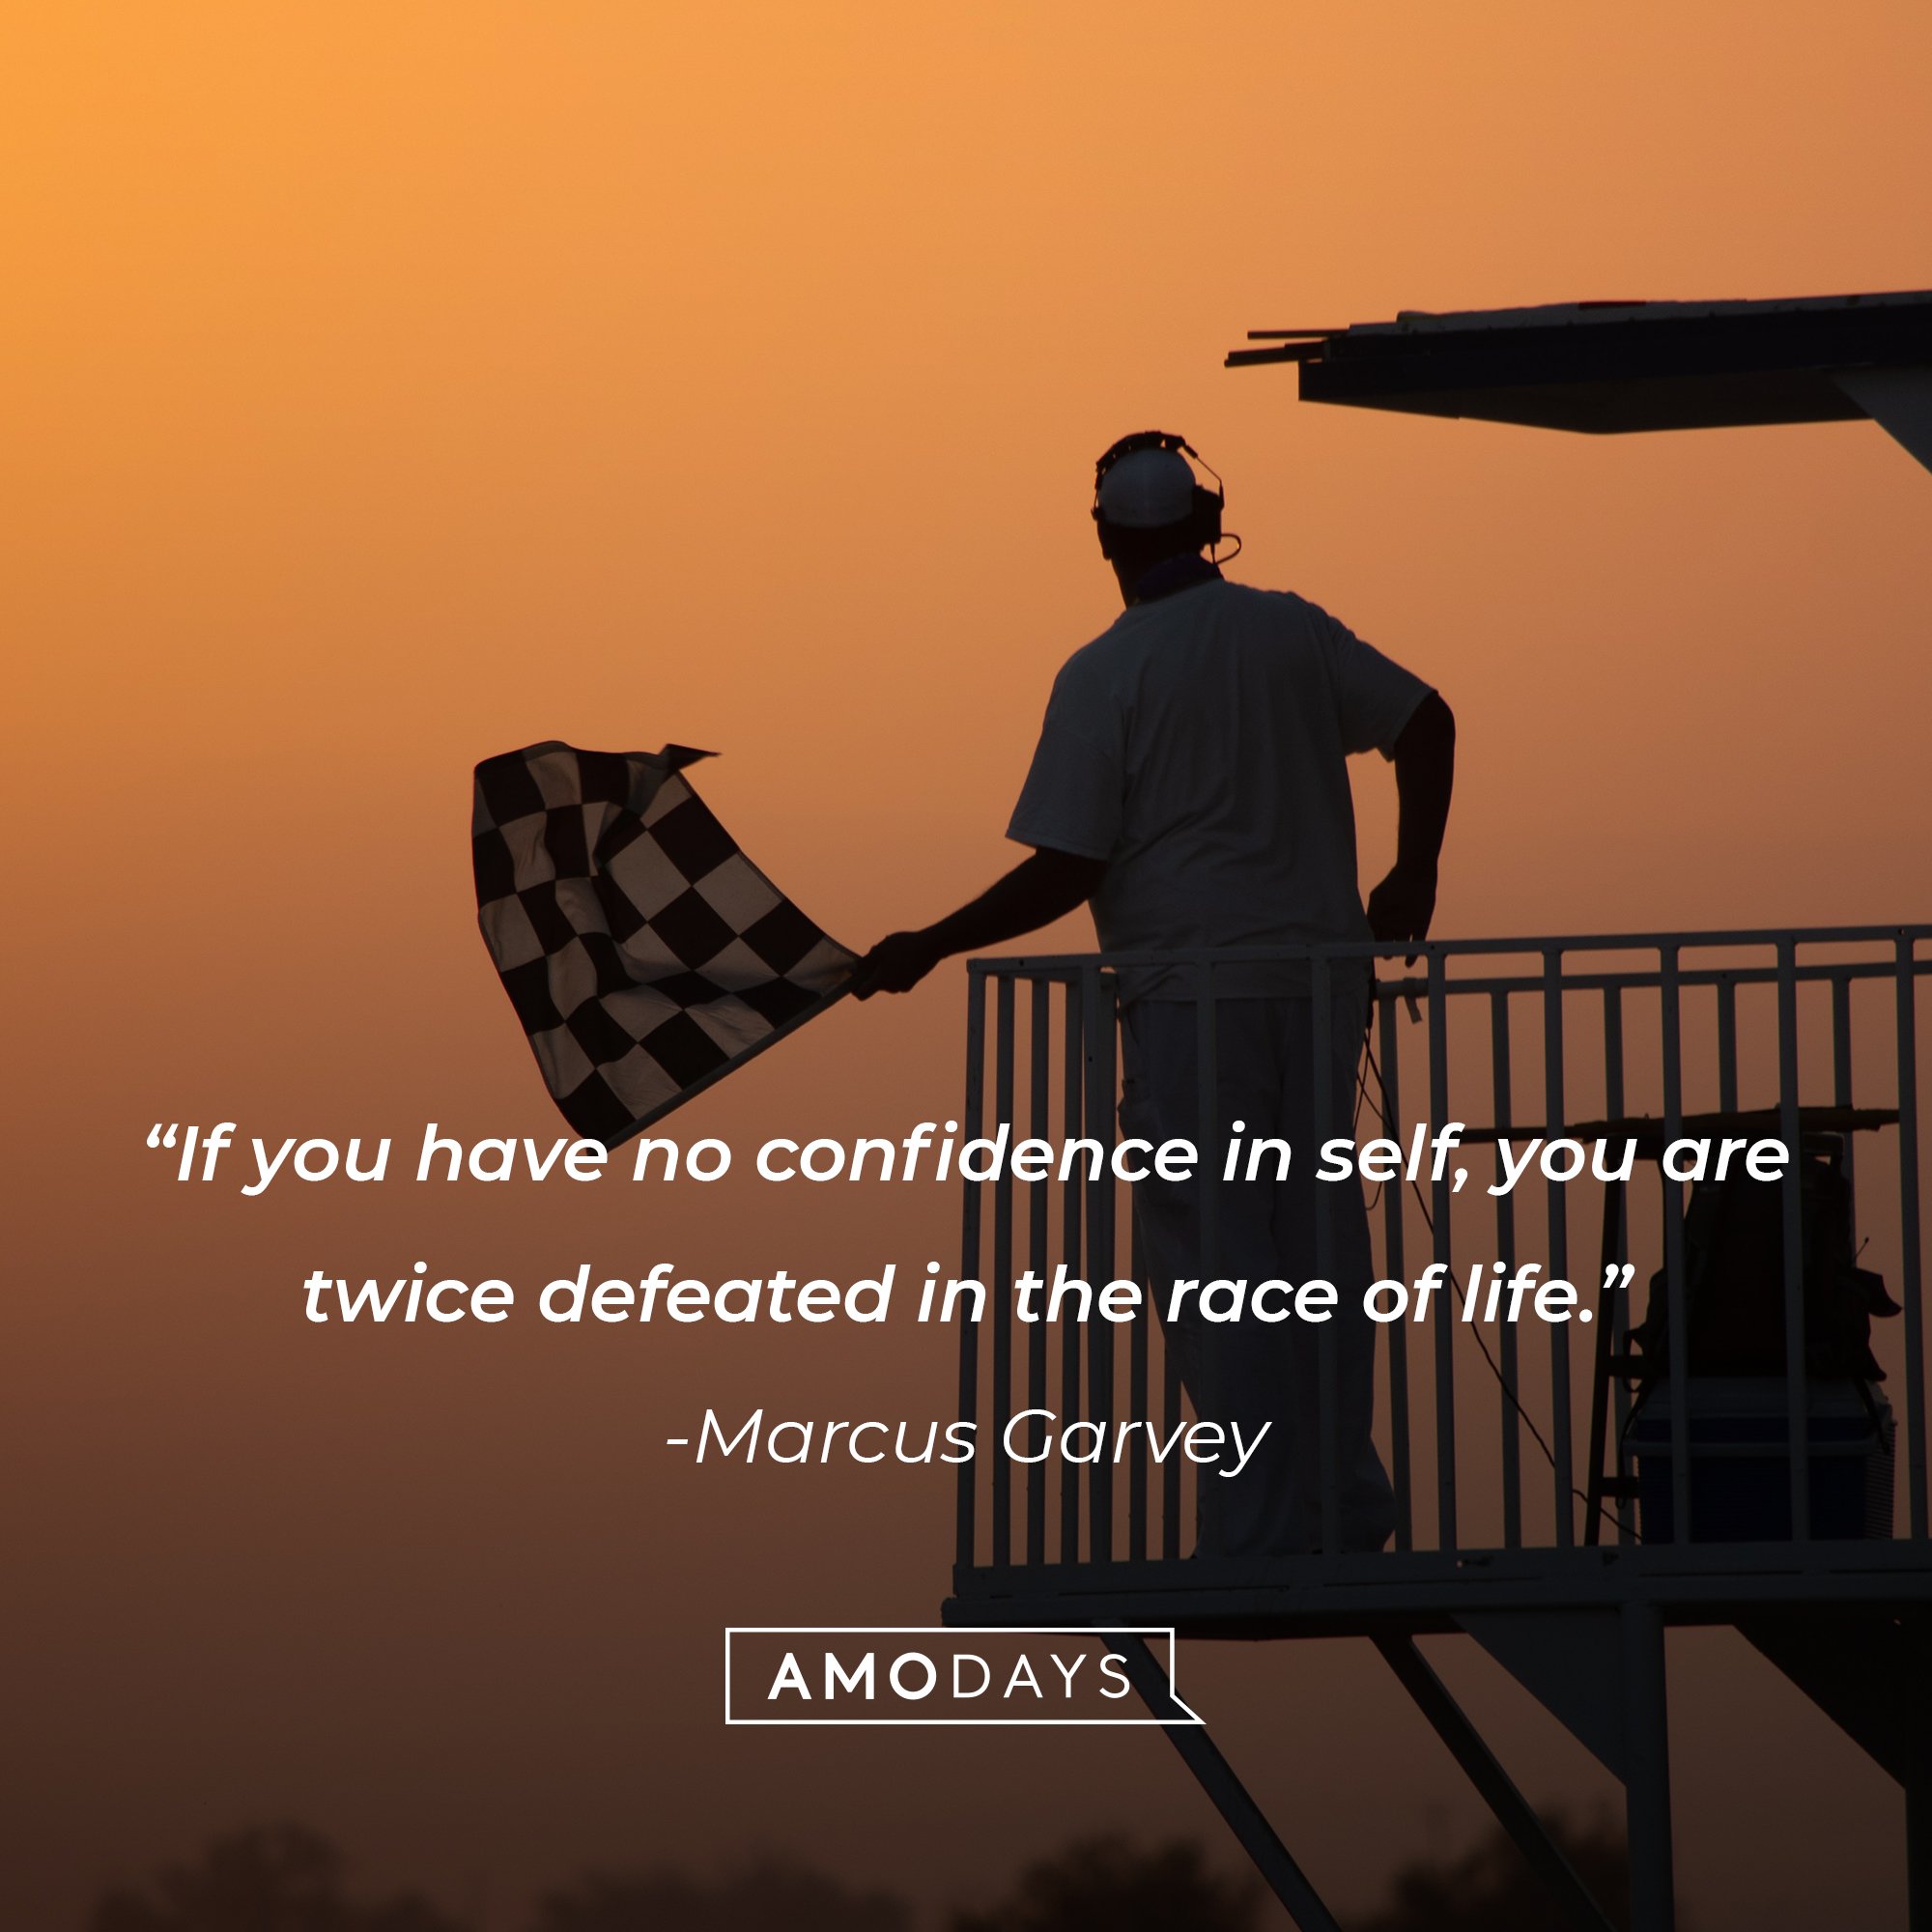 Marcus Garvey's quote: "If you have no confidence in self, you are twice defeated in the race of life." | Image: AmoDays